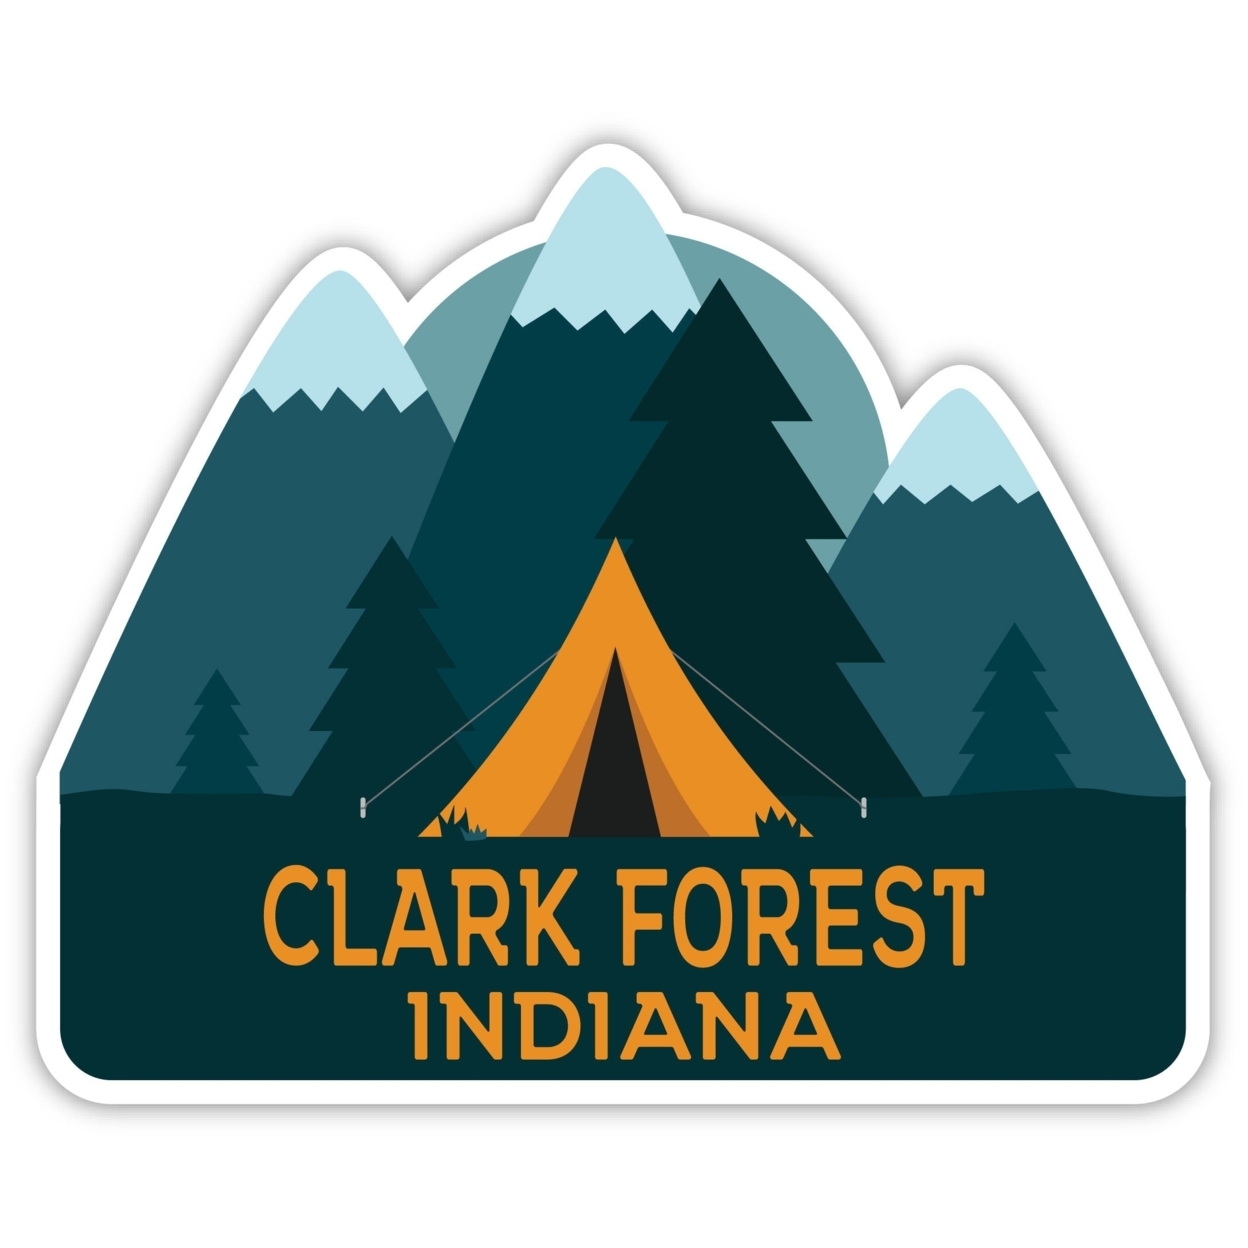 Clark Forest Indiana Souvenir Decorative Stickers (Choose Theme And Size) - Single Unit, 12-Inch, Tent